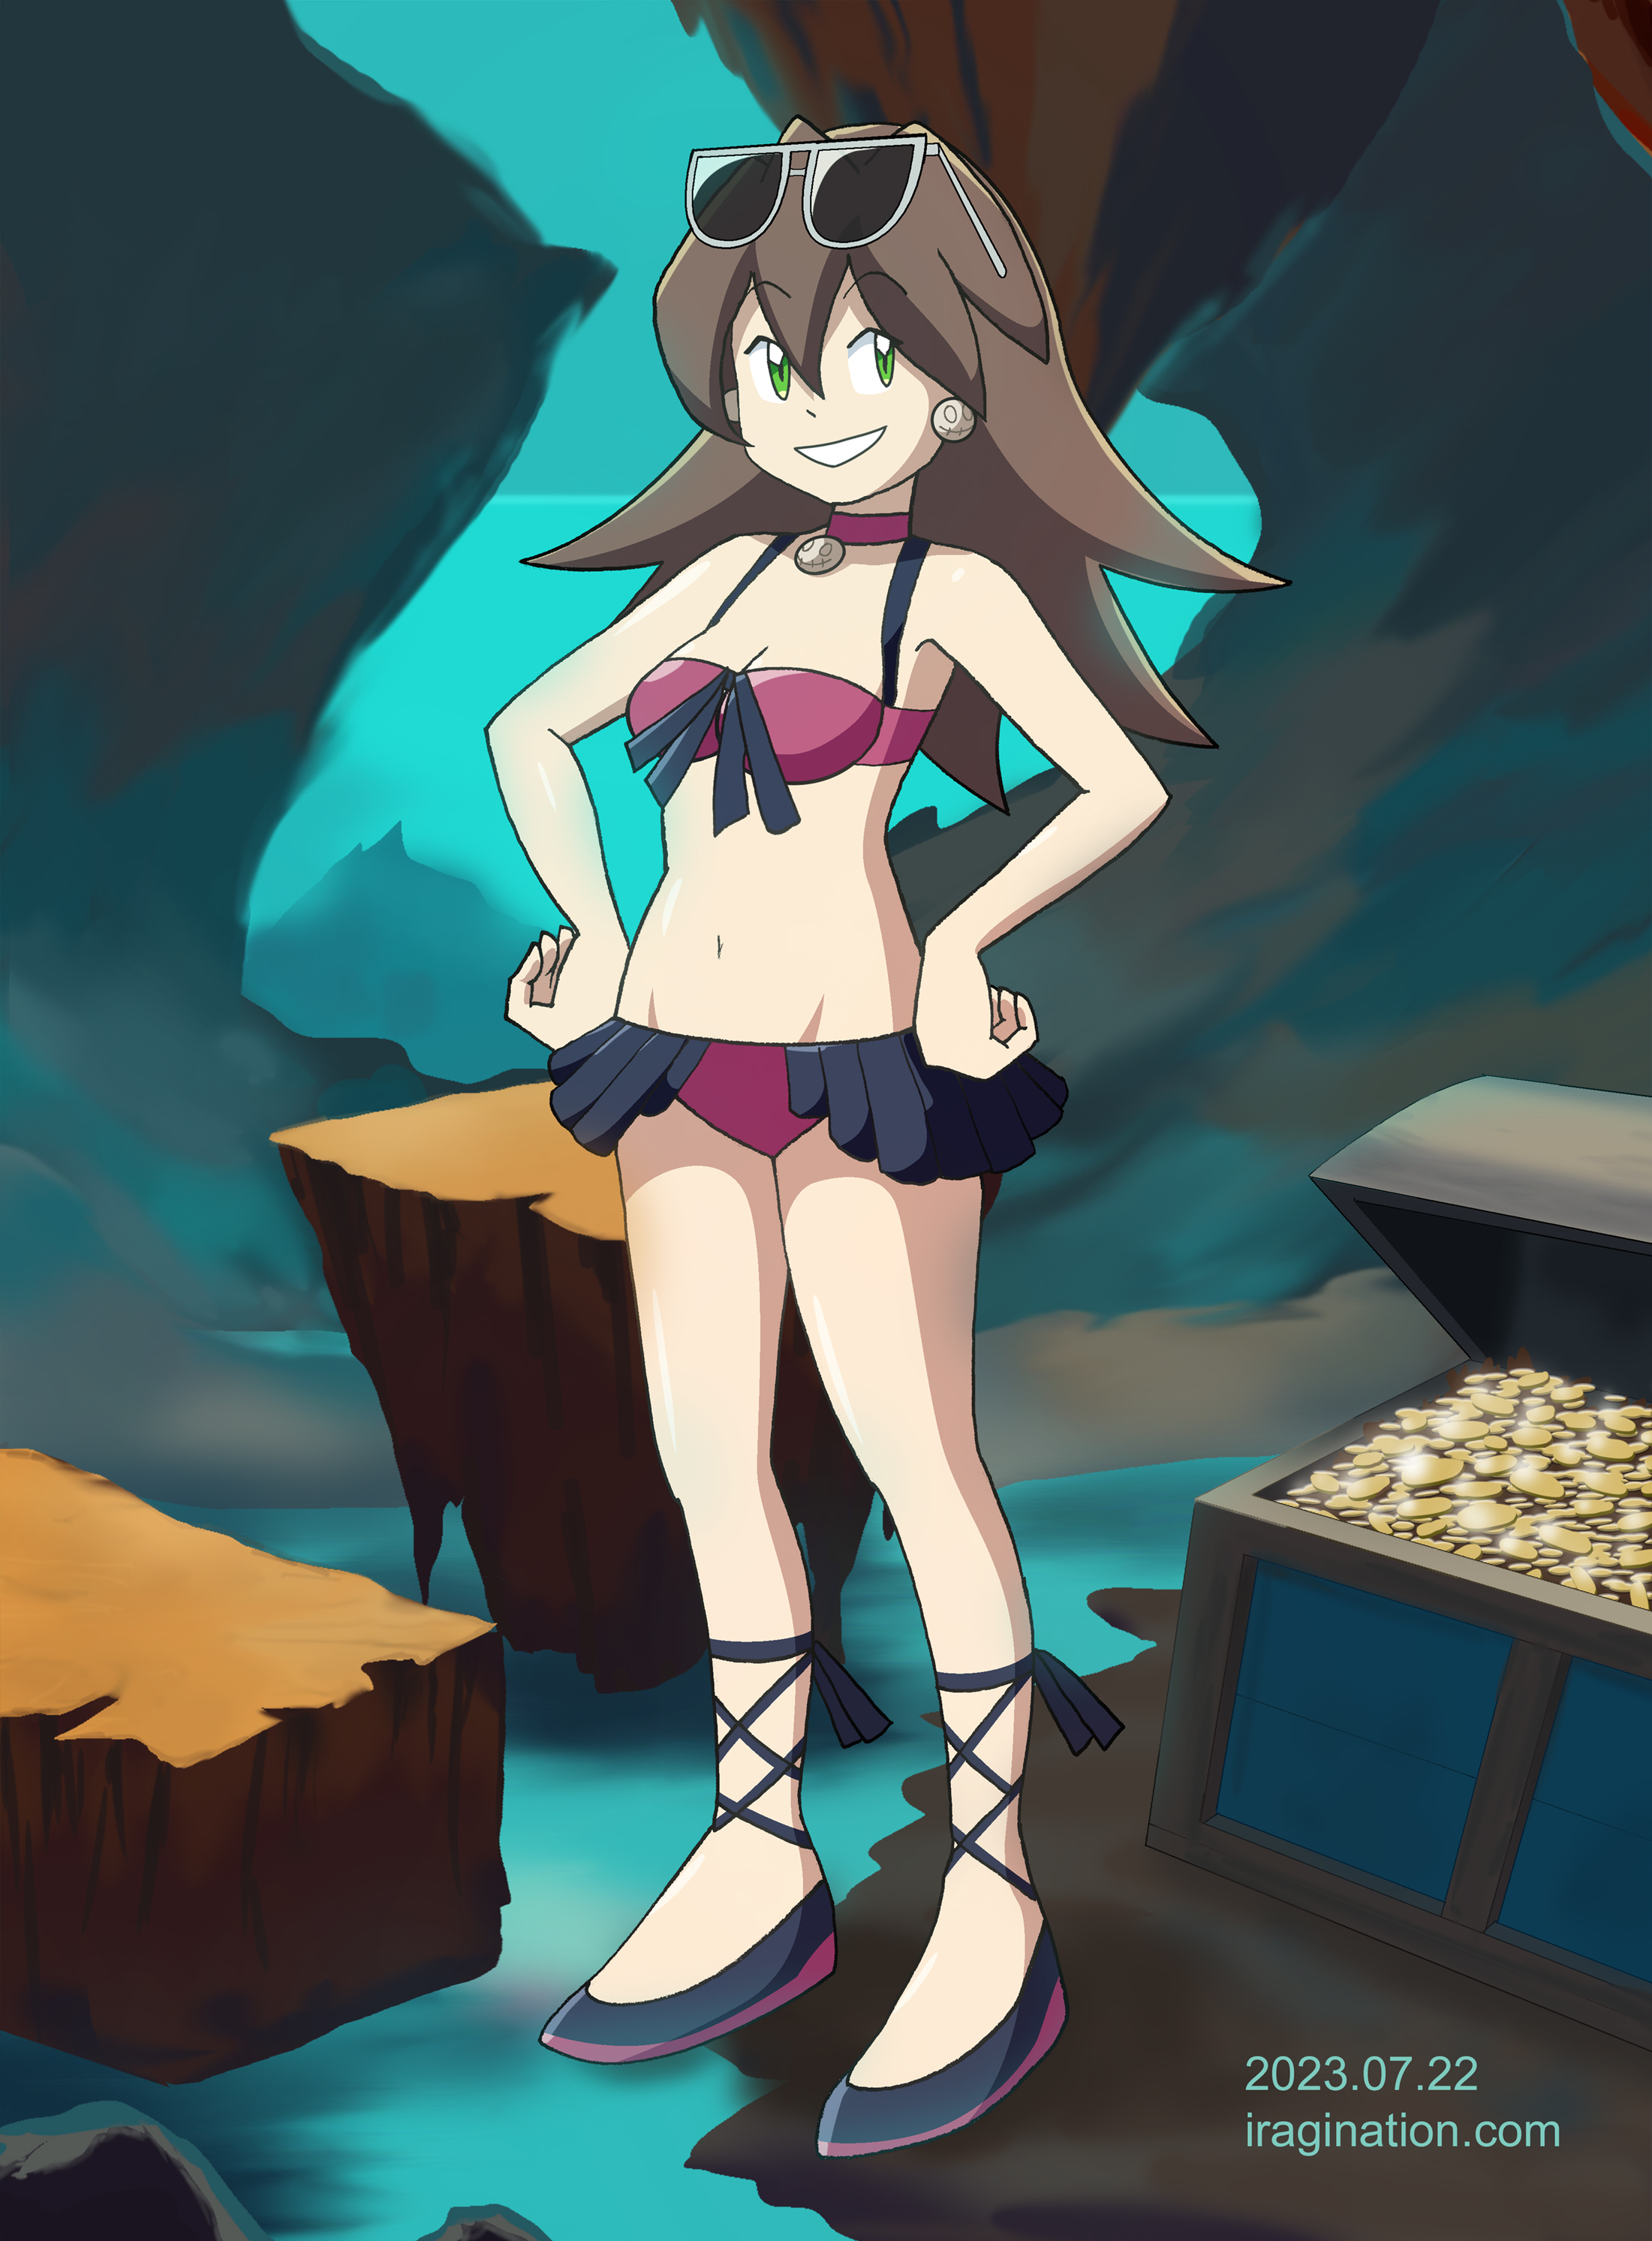 Swimsuit Tron - Treasure Hunter
On the topic of generative AI, I used an online tool to get a quick draft of the background. I was not going to get a high-resolution image with this method, so I painted on a blank canvas using the generated image as a reference. It was a fun exercise to get something done quickly.

Mega Man X DiVE © CAPCOM

[b]References[/b]
[url=https://hotpot.ai/s/art-generator/8-FIcIaJatK23RPtM]AI Generated Background[/url]
Keywords: Tron_Bonne